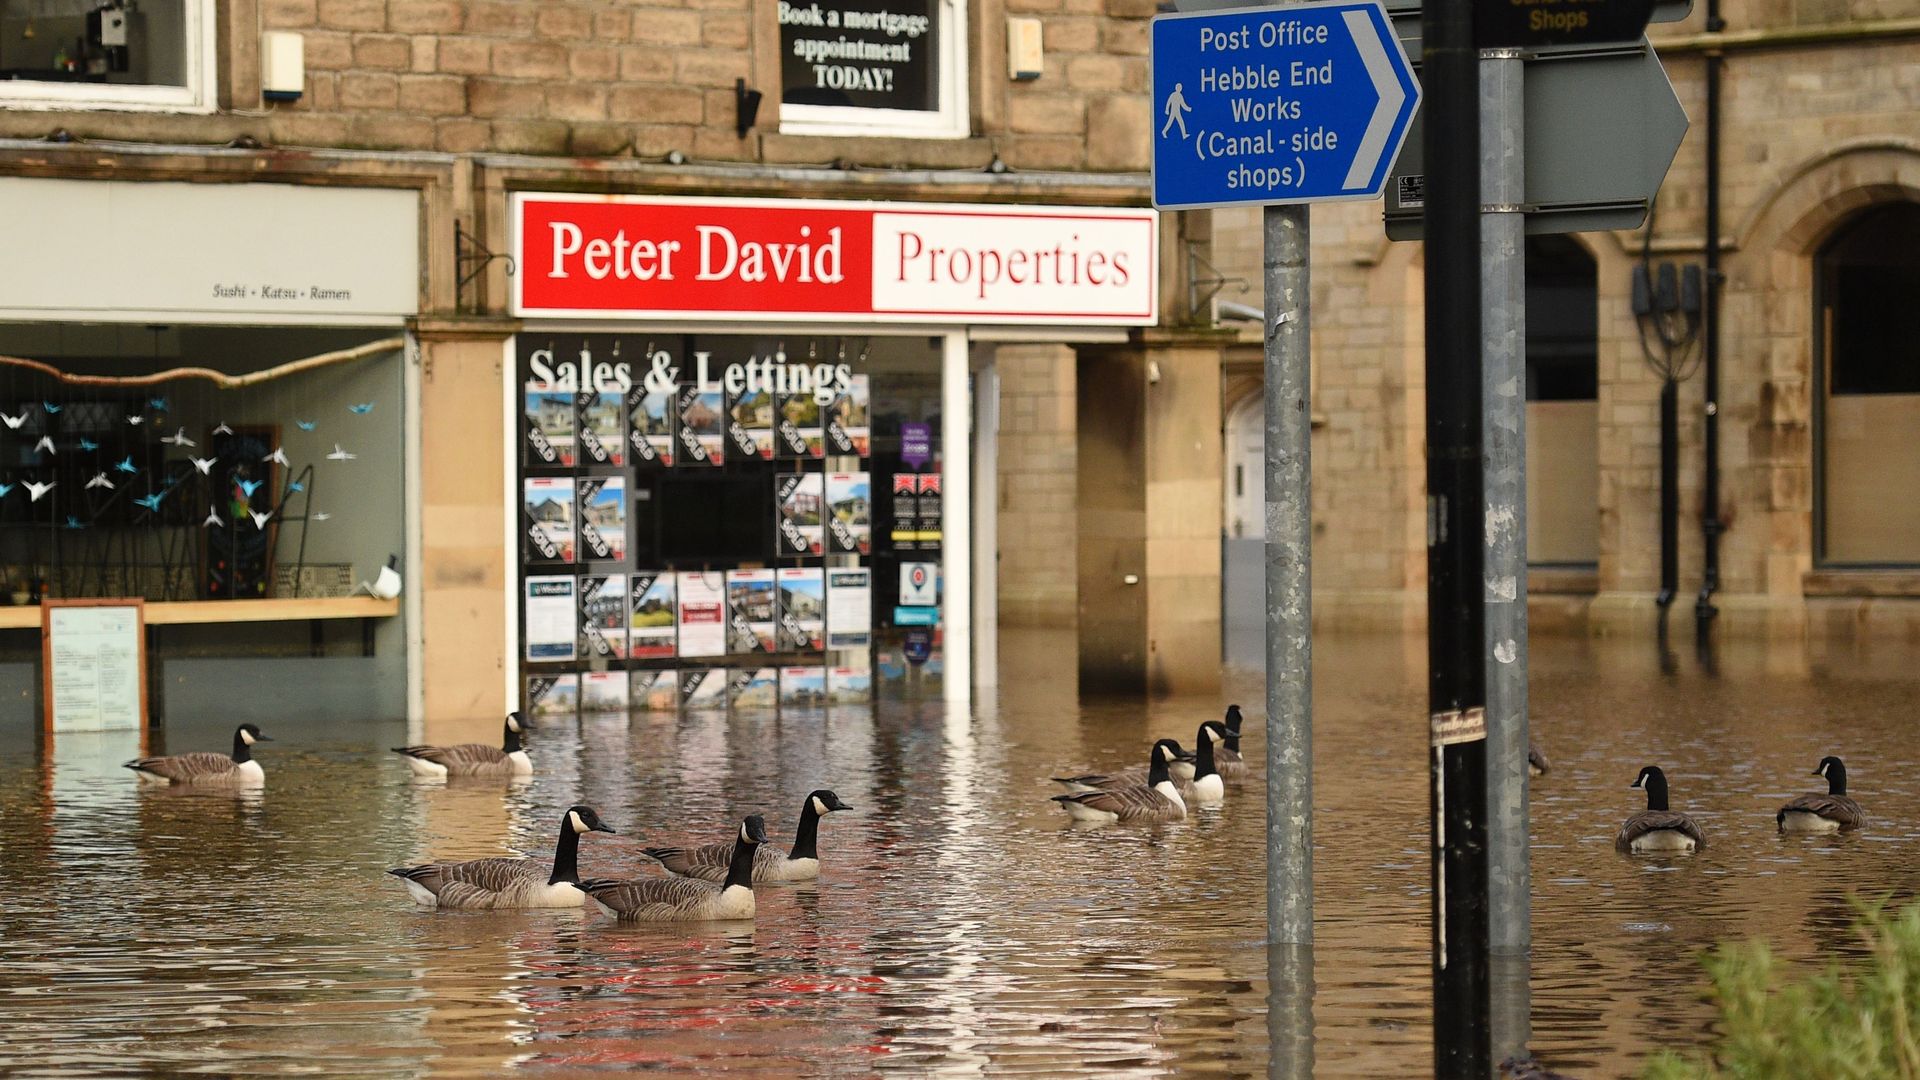 Geese take advantage of the conditions as floodwater fills the streets of Hebden Bridge, northern England